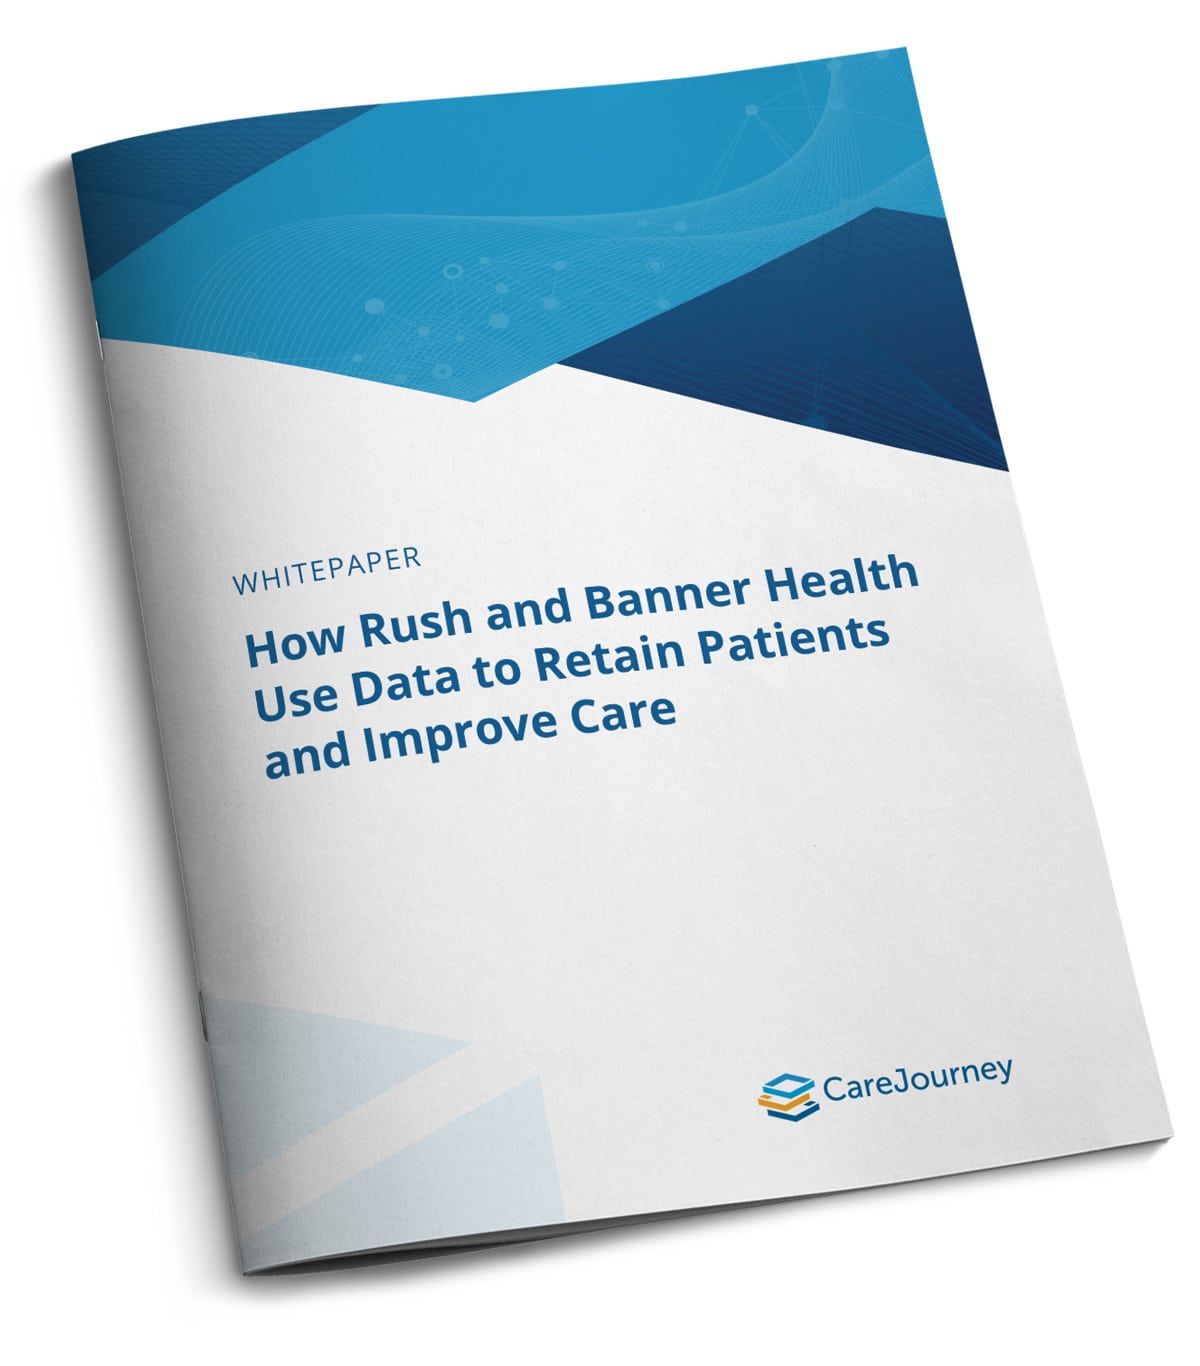 Whitepaper: How Rush and Banner Health Use Data to Retain Patients and Improve Care